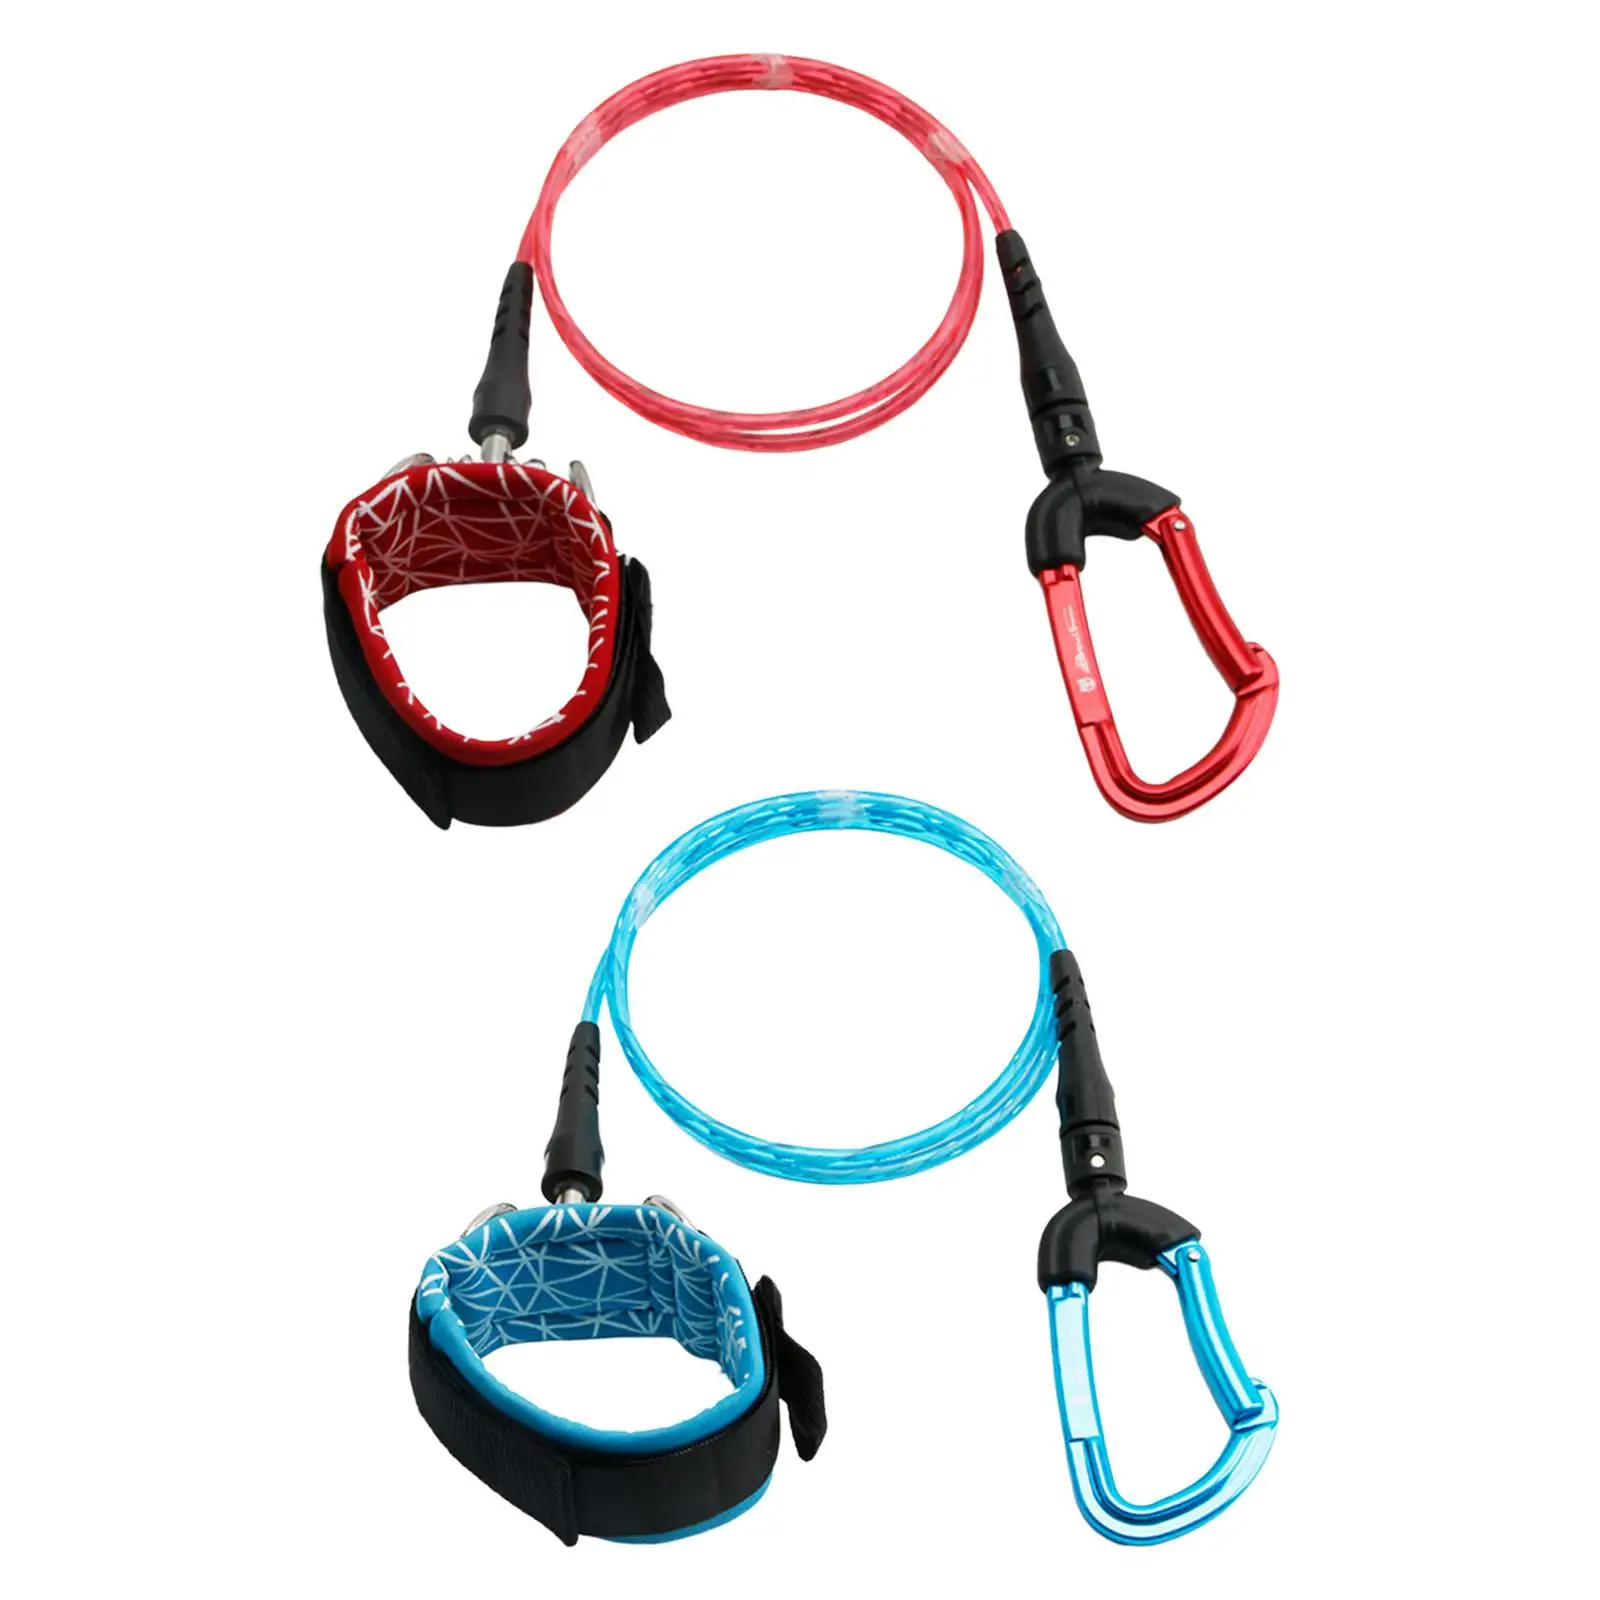 Freediving Lanyard Comfortable with Scuba Diving Rope Fits for Underwater Sports